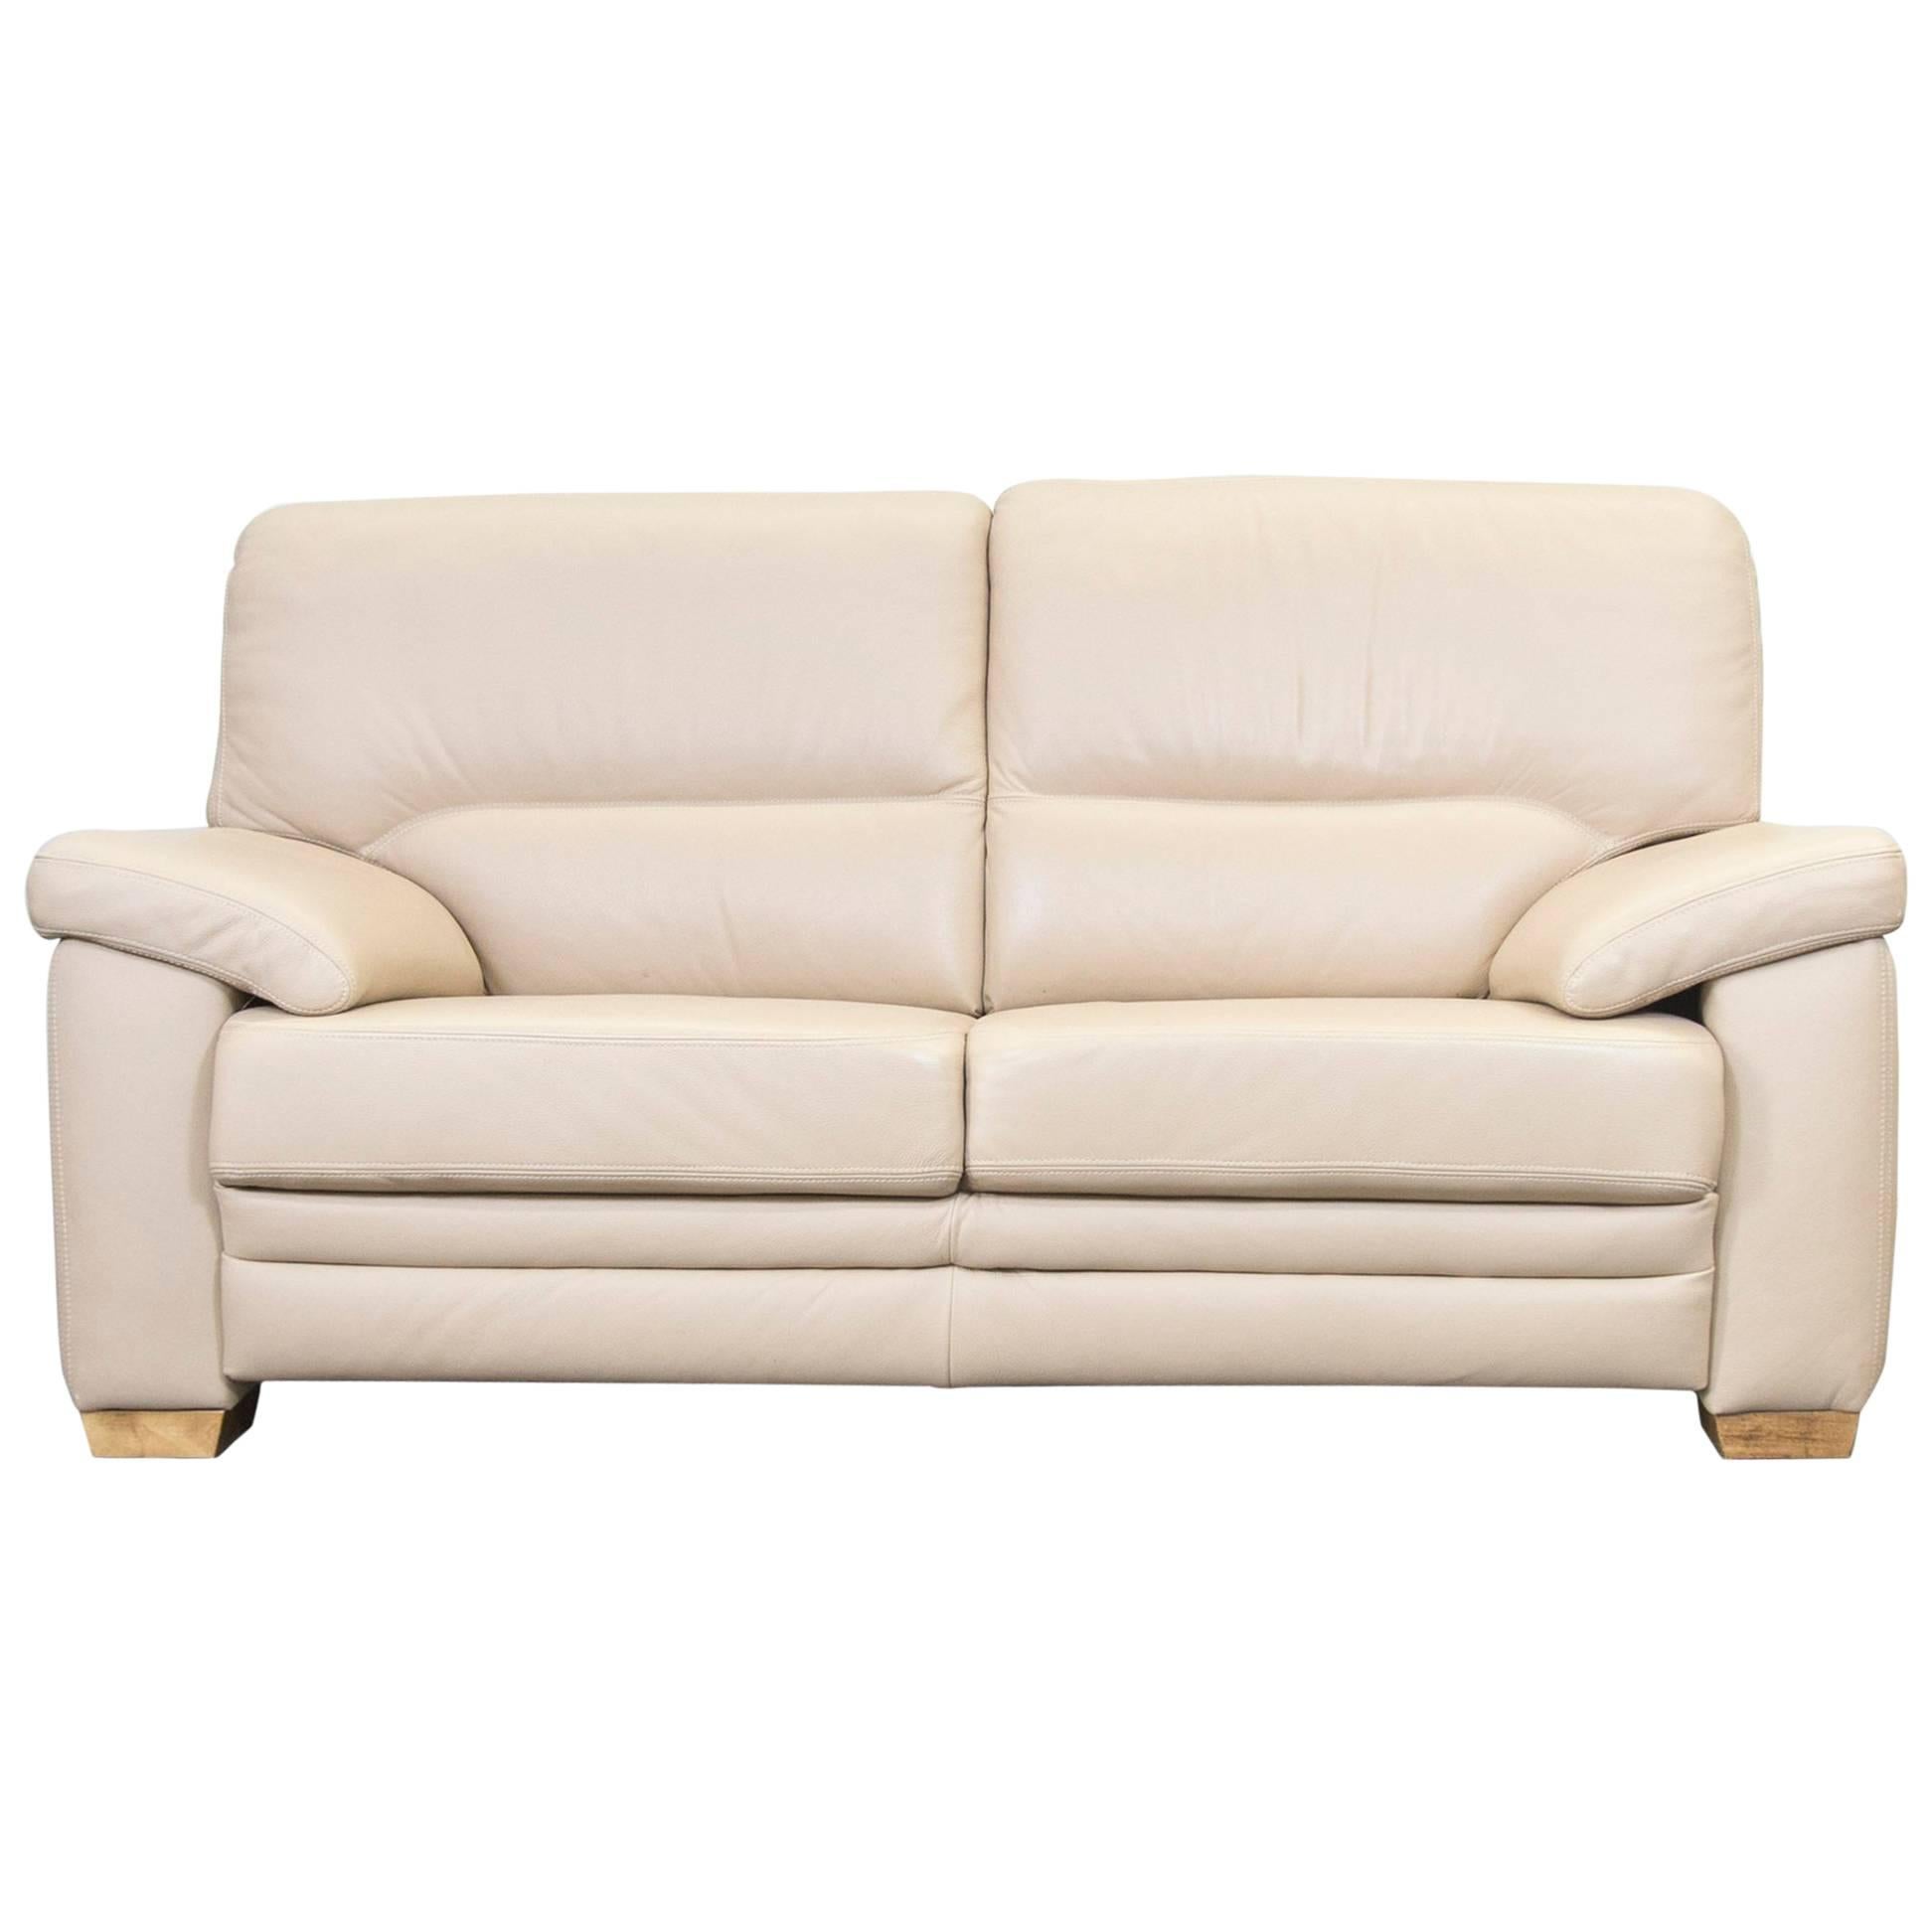 Designer Sofa Beige Leather Two-Seat Couch Modern